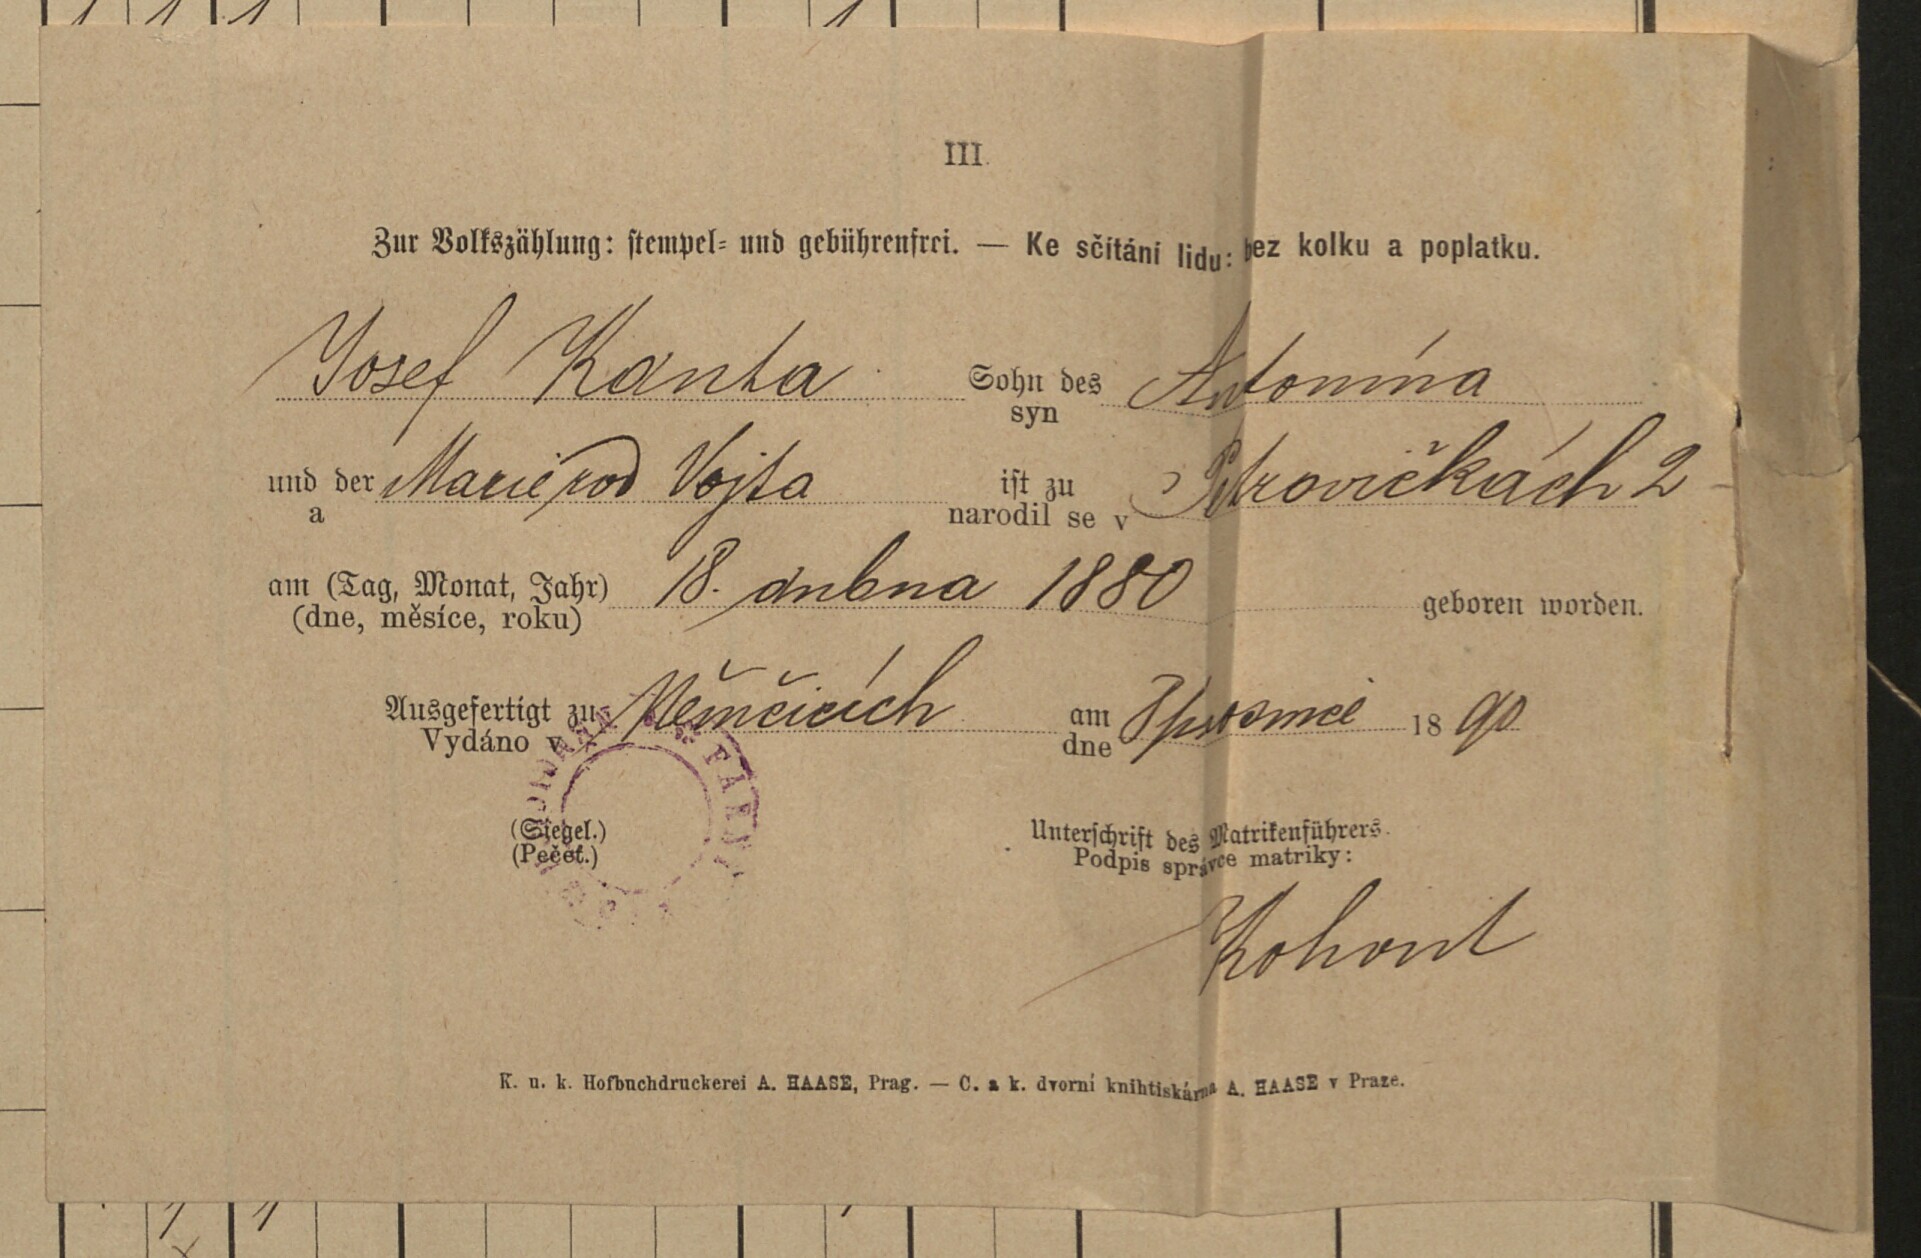 2. soap-kt_01159_census-1890-petrovicky-cp002_0020